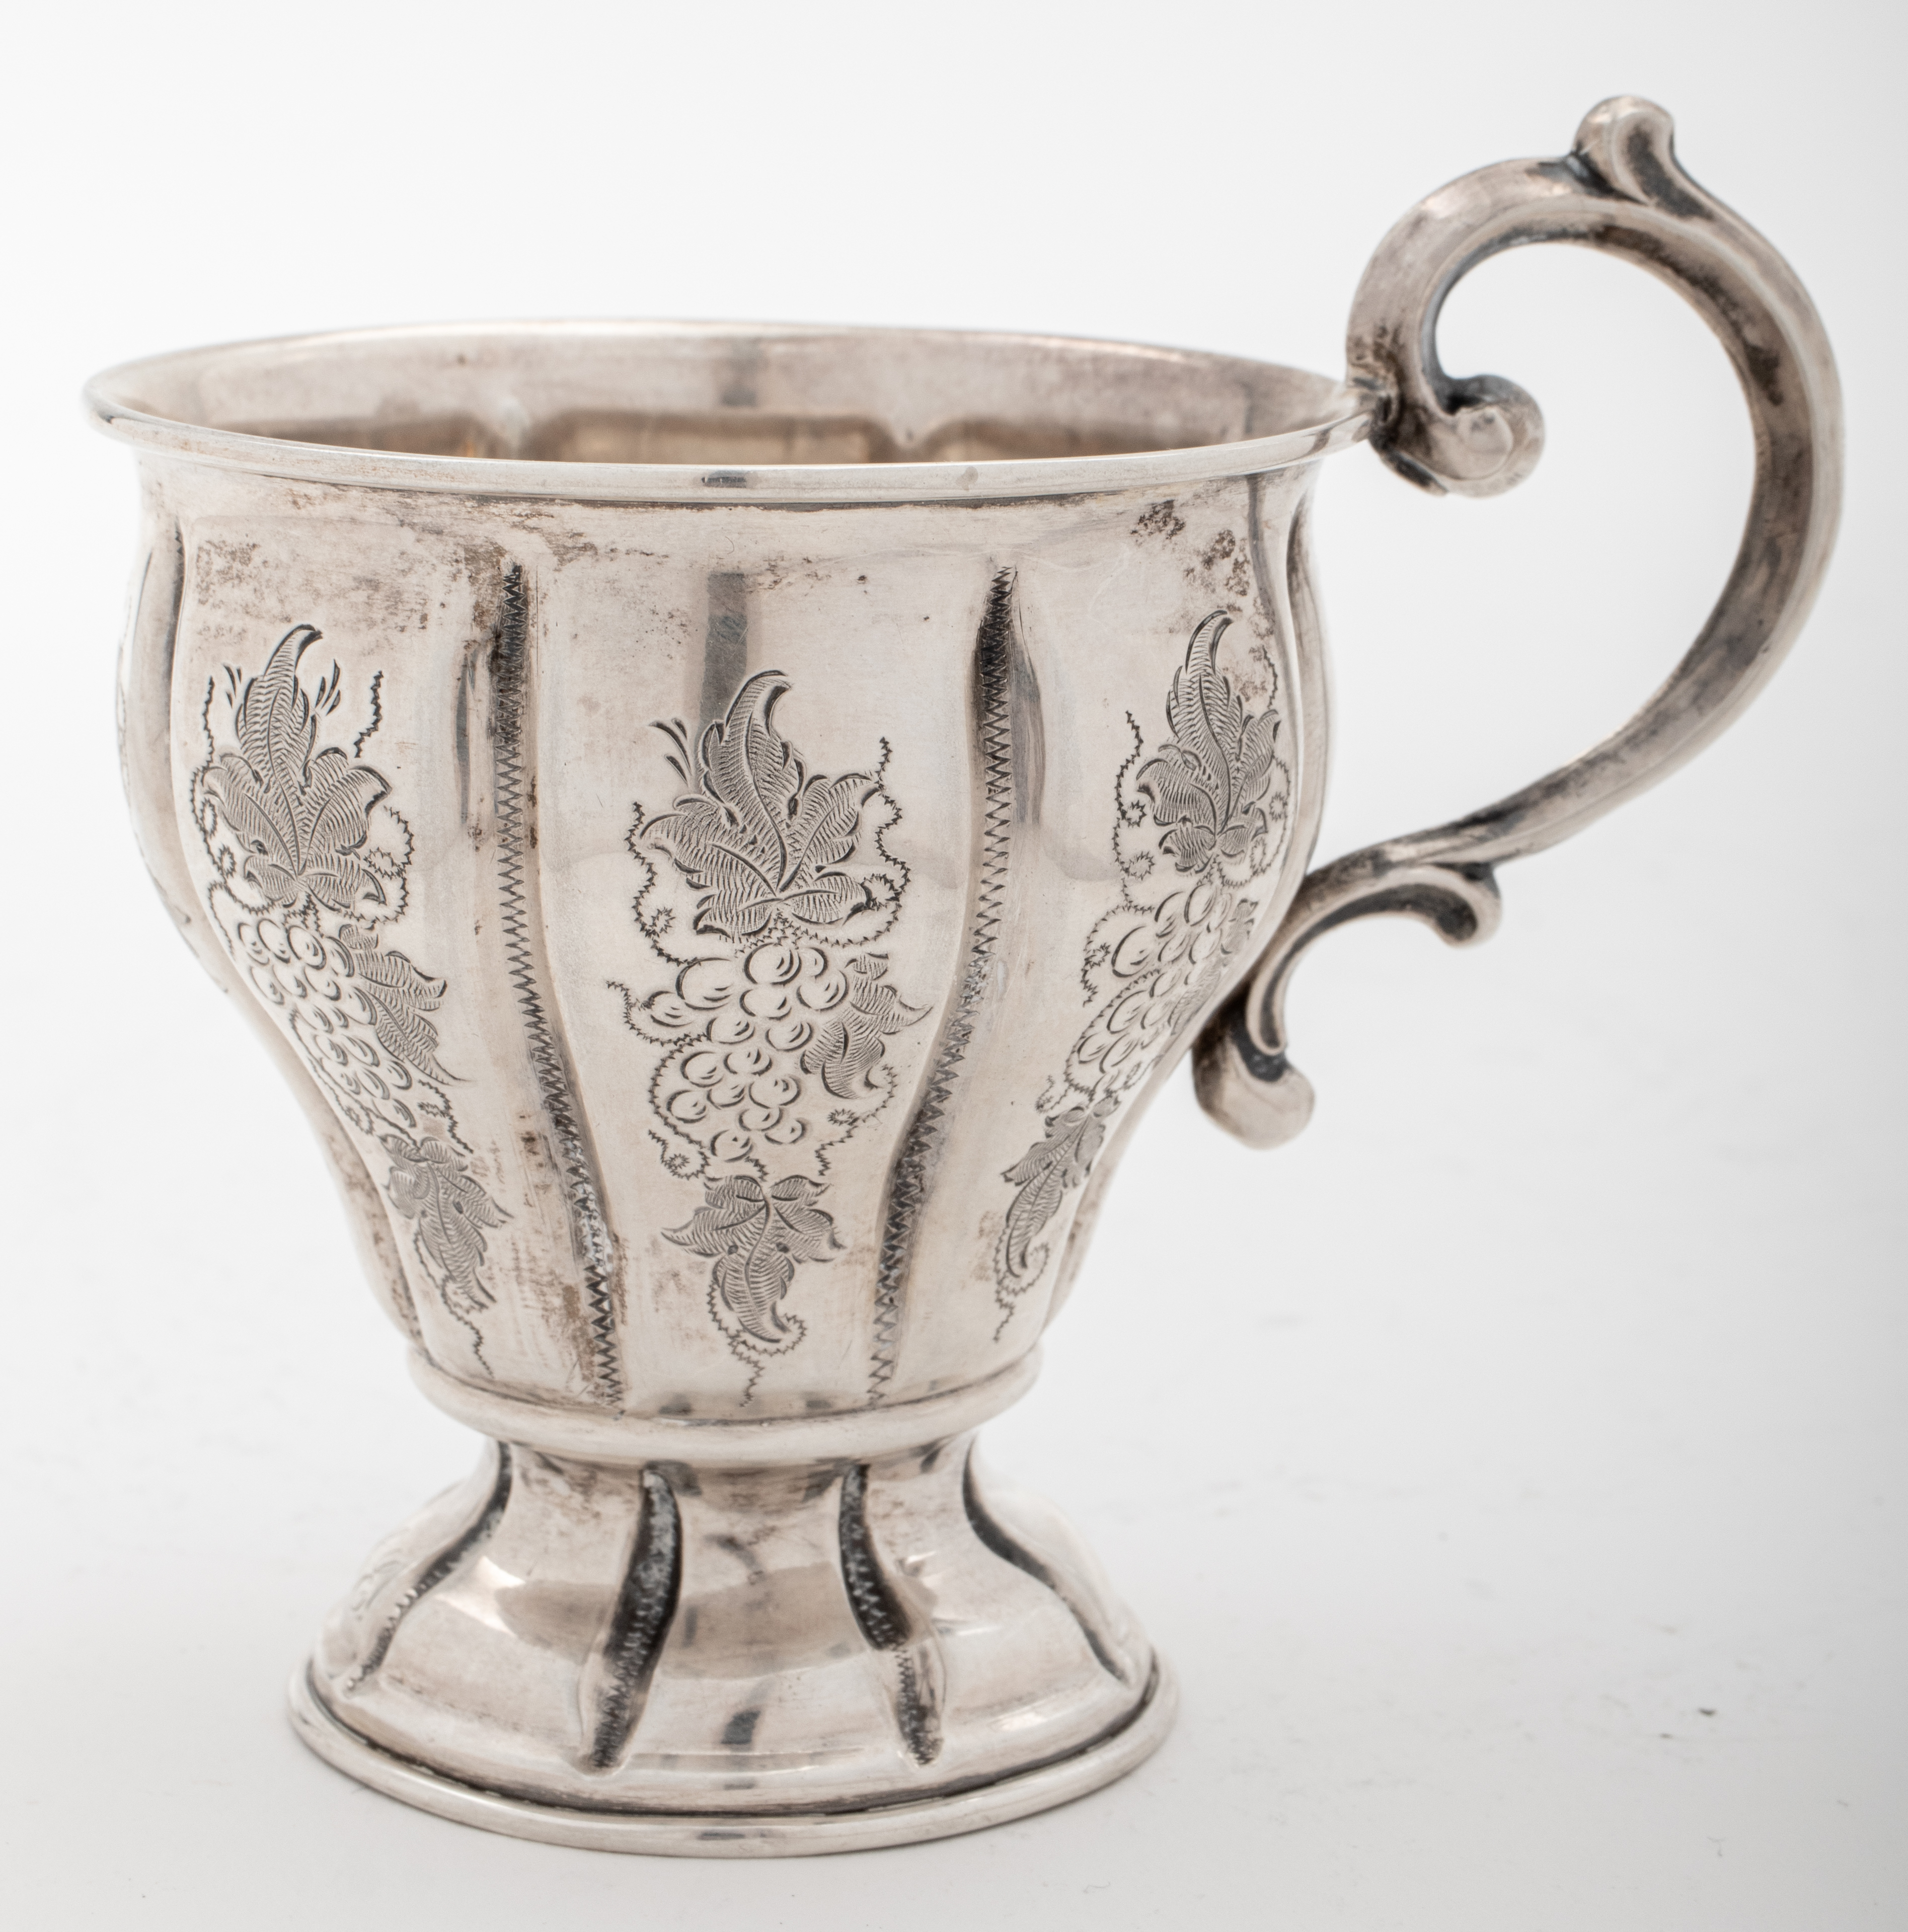 PERUVIAN ENGRAVED SILVER CUP 19TH 2bd4c7